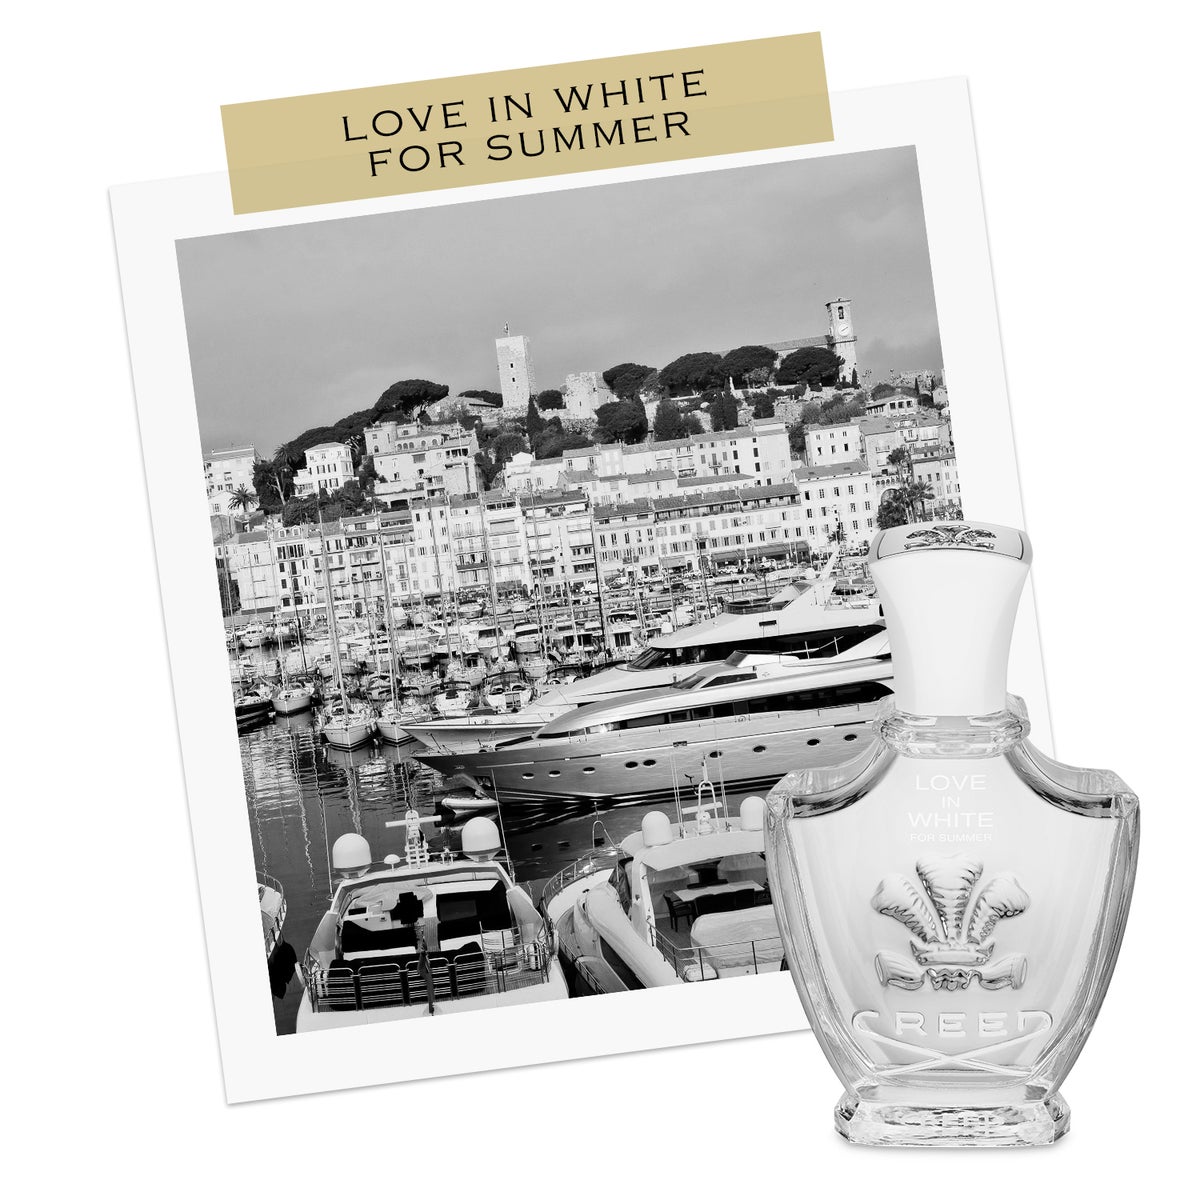 Love In White For Summer bottle infront of black & white postcard of boats in harbour of French Riviera